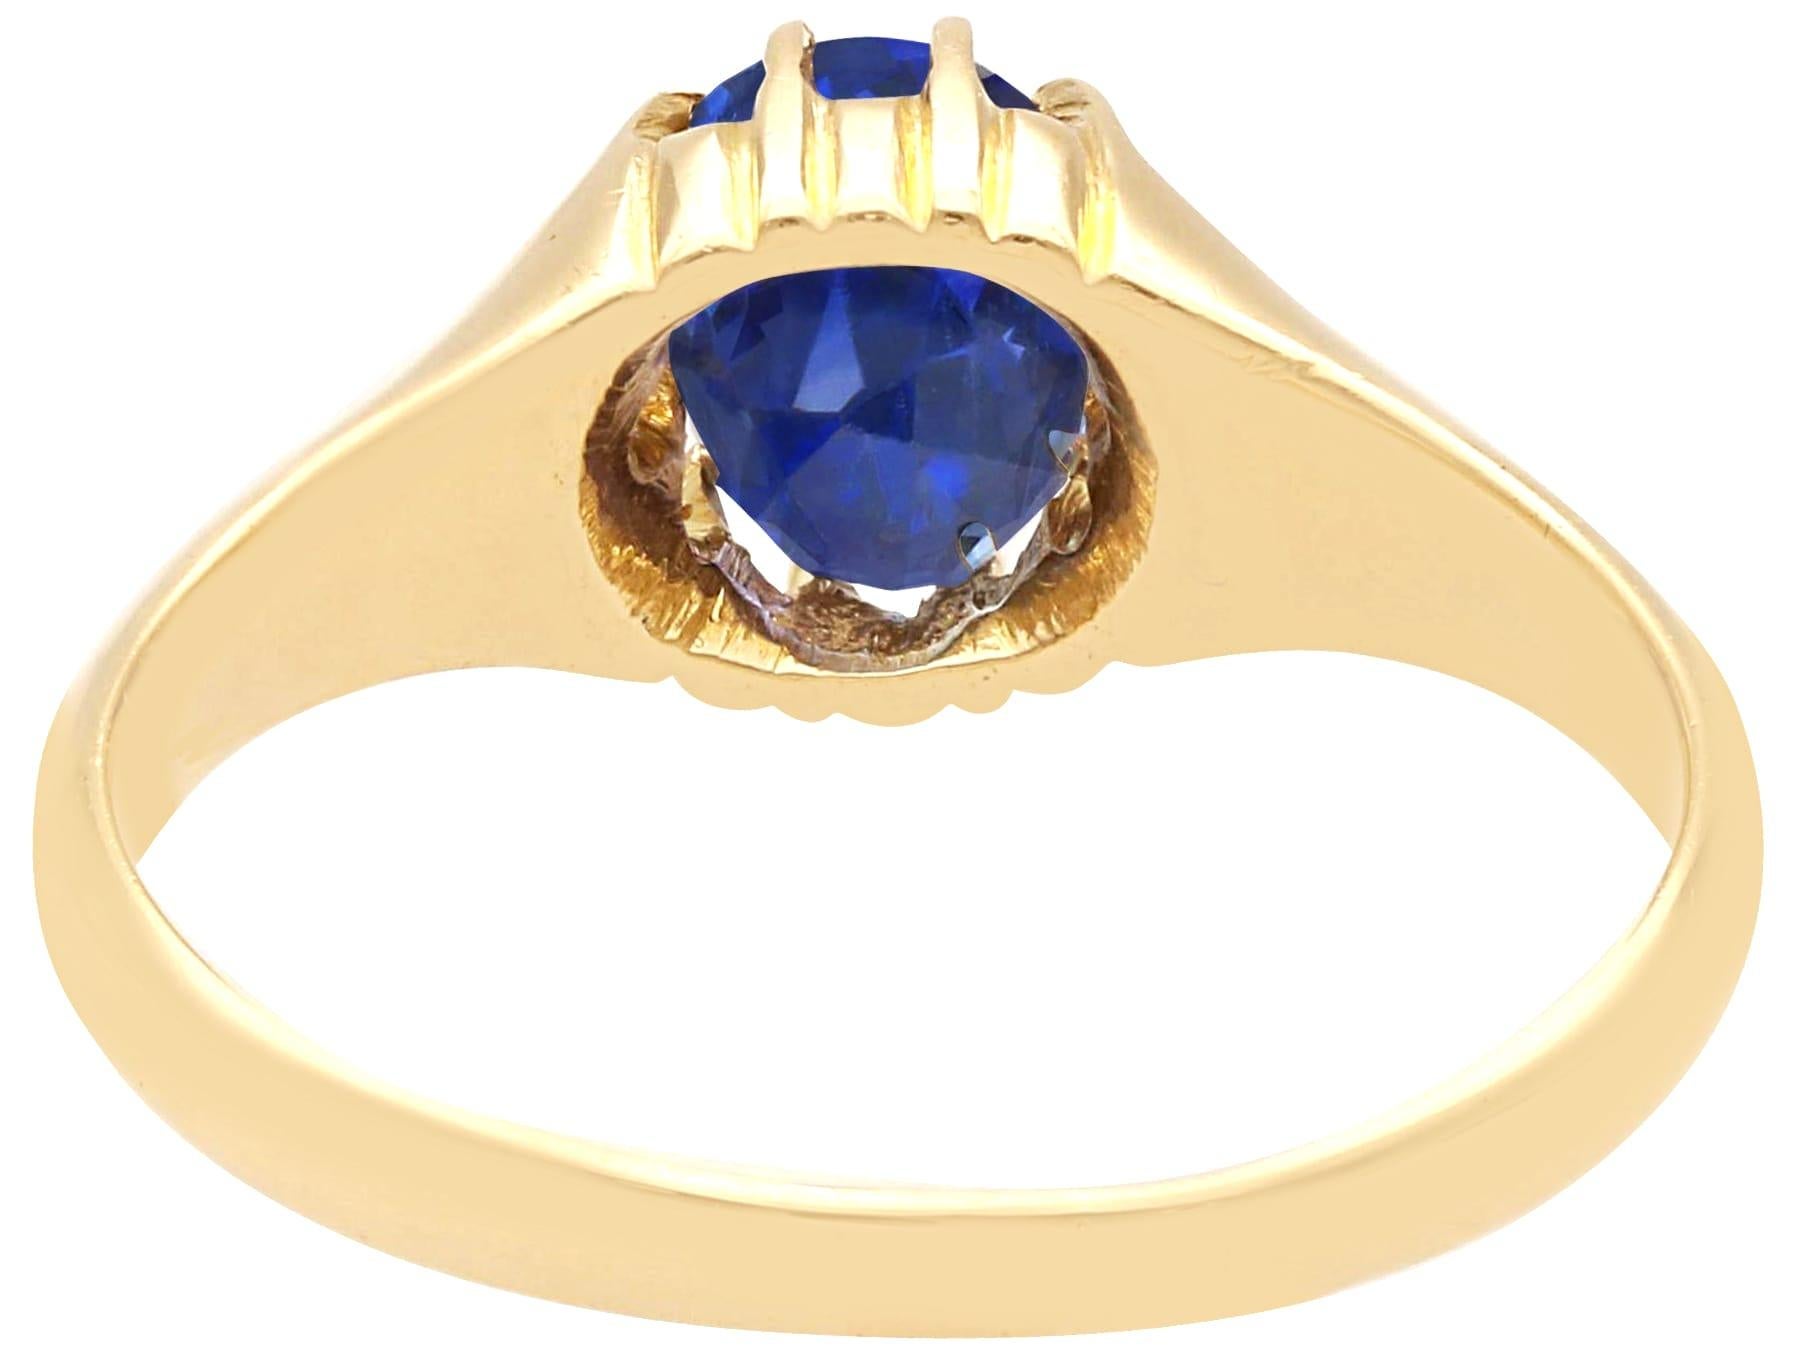 Antique 1.42 Carat Basaltic Sapphire and 14k Yellow Gold Ring, circa 1910 In Excellent Condition For Sale In Jesmond, Newcastle Upon Tyne